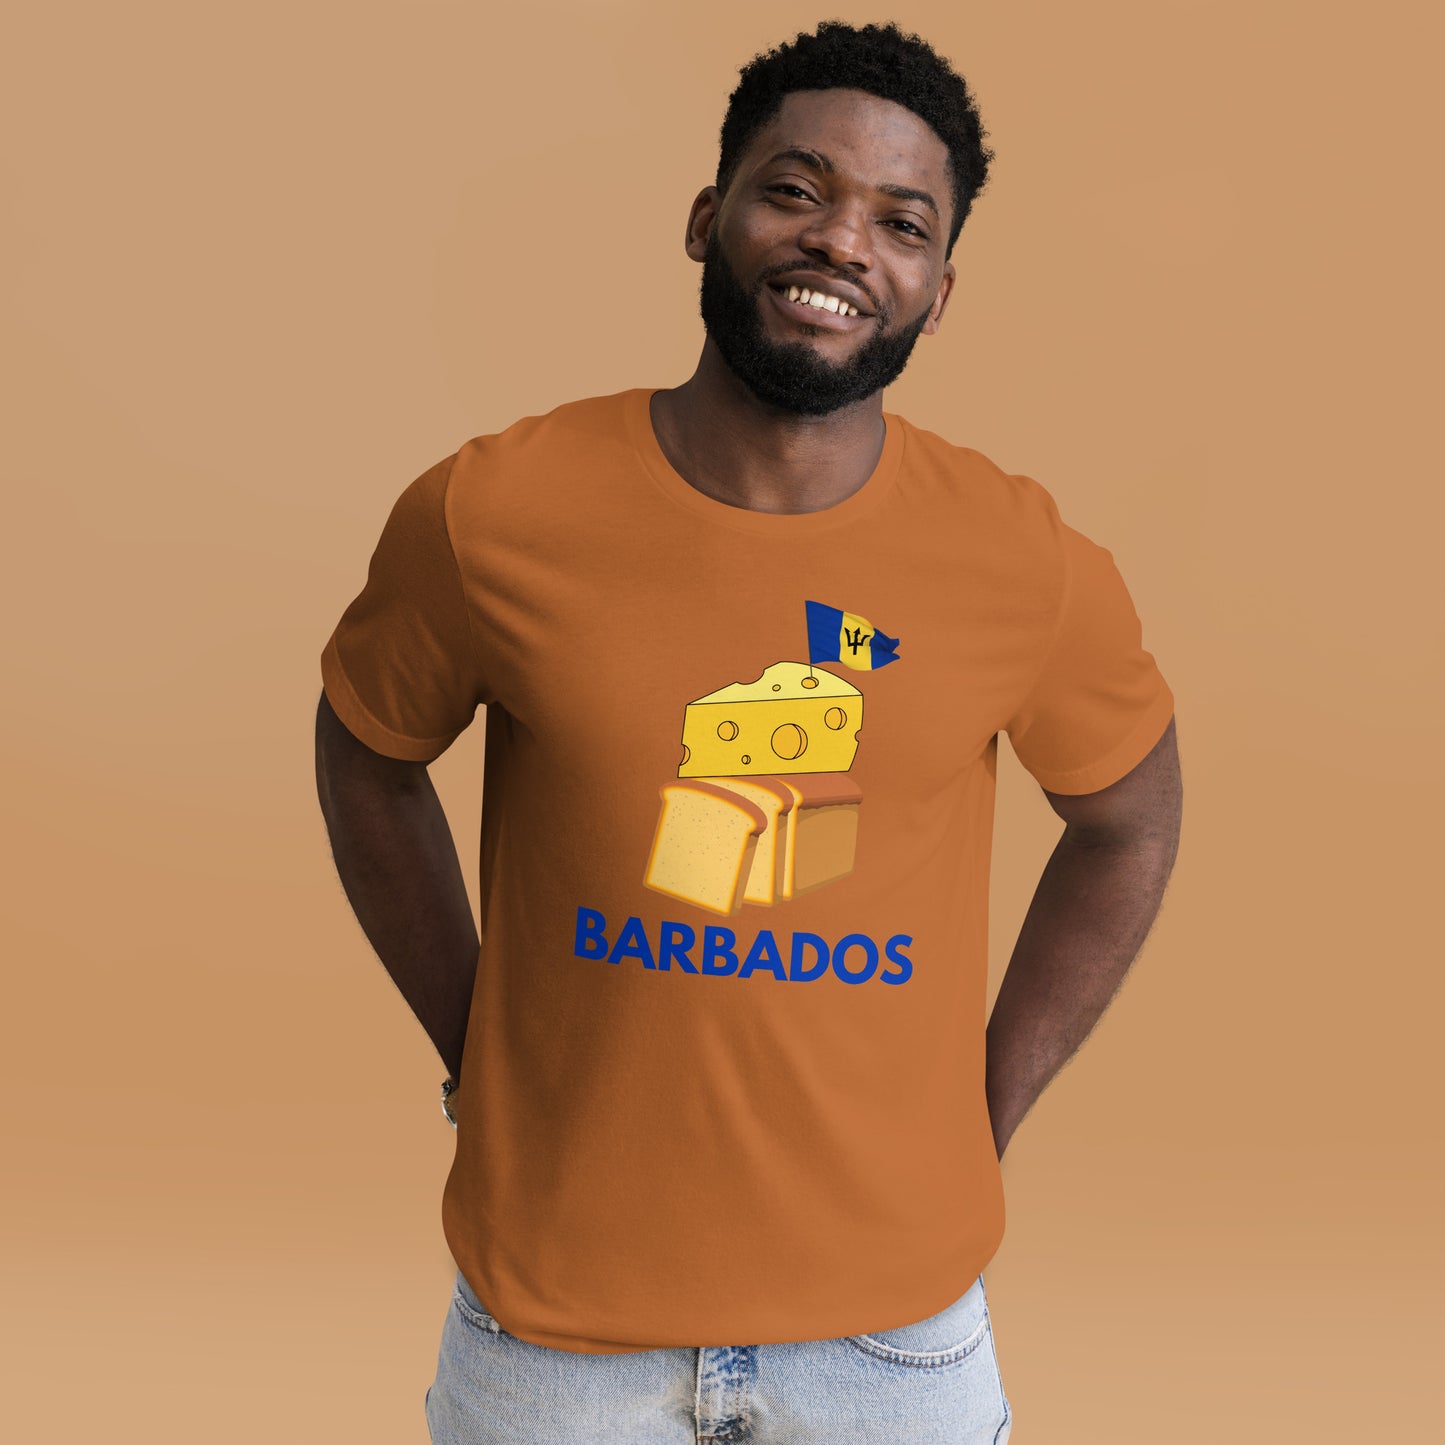 Barbados - "Cheese on Bread" Men's T-shirt